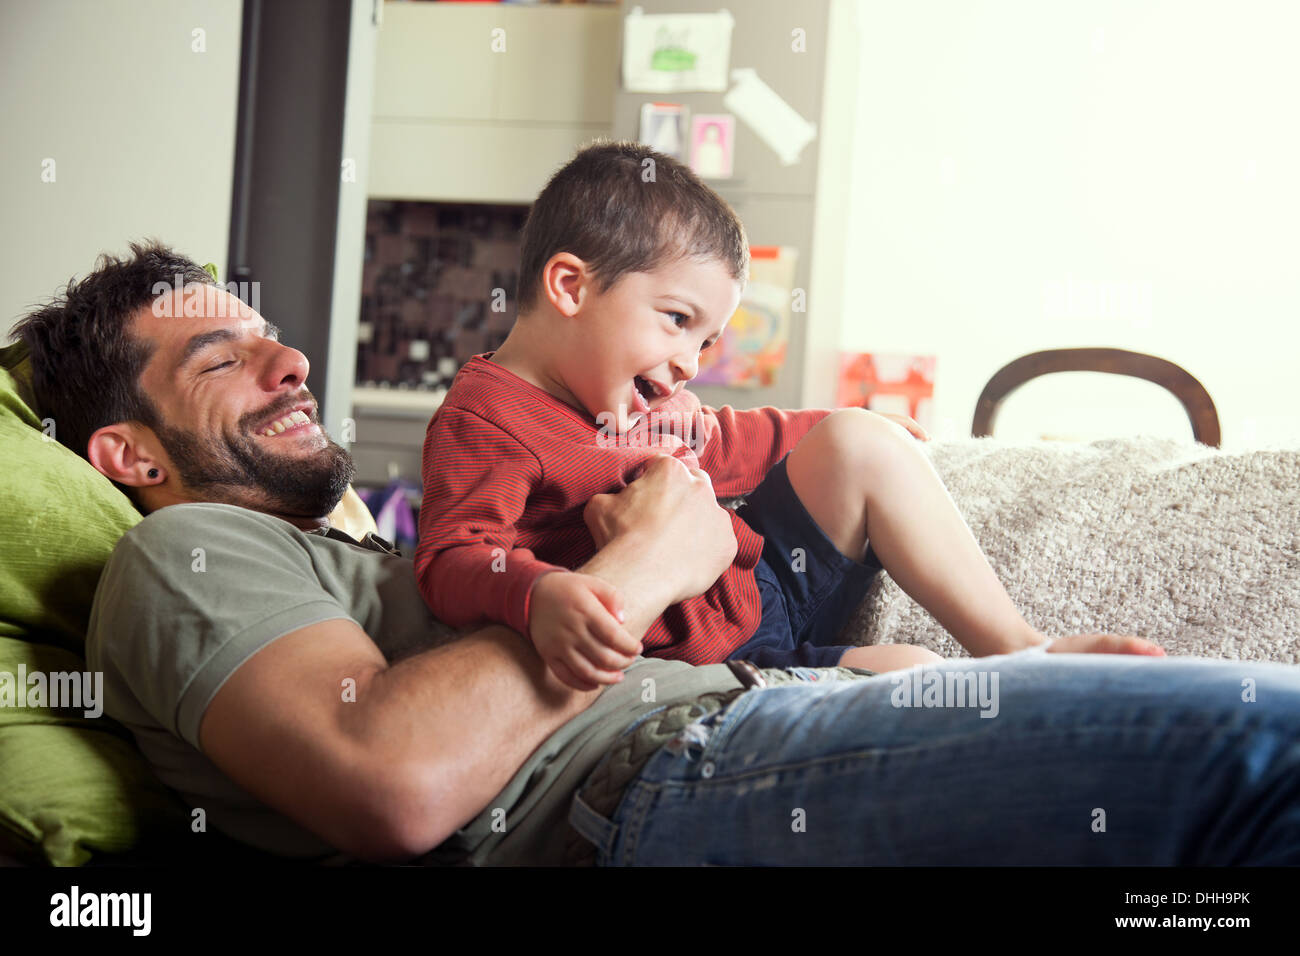 Father reclined on sofa with son on lap Stock Photo